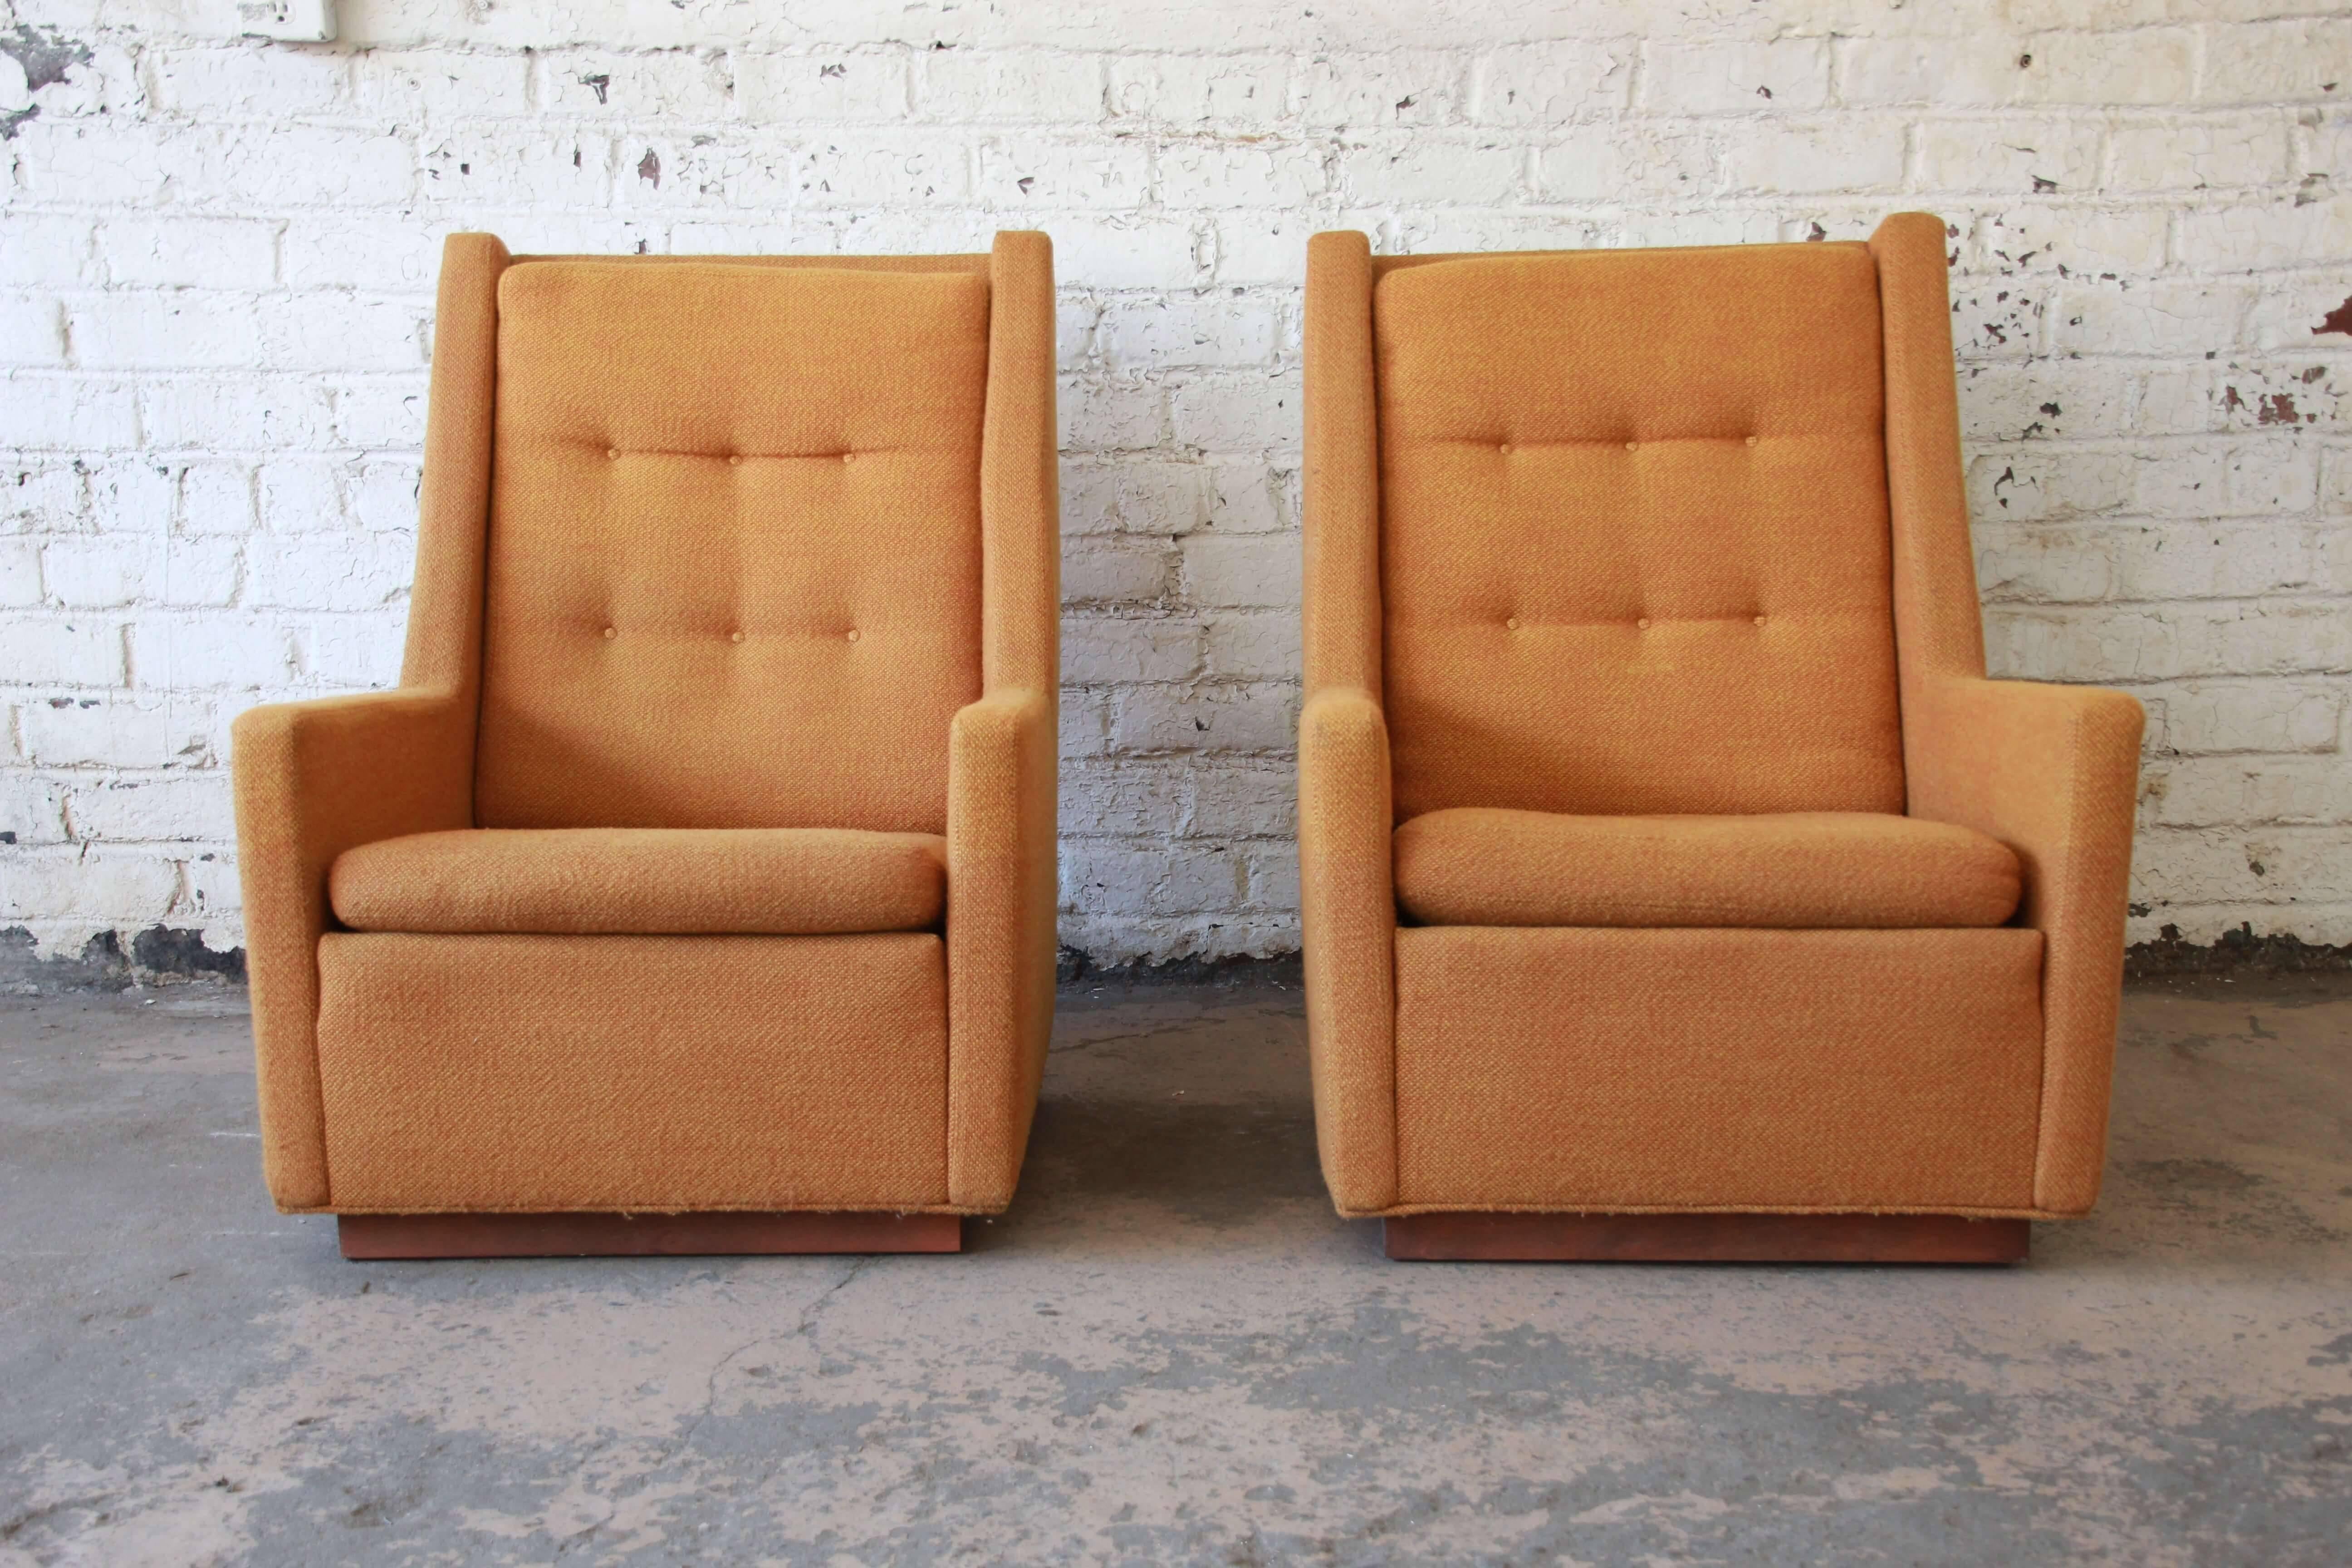 Offering an original pair of Mid-Century Modern lounge chairs and ottoman by Milo Baughman for James, Inc. The chairs are apart of the 'Articulate Seating' line and have original orange a yellow upholstery and feature a walnut plinth base. The